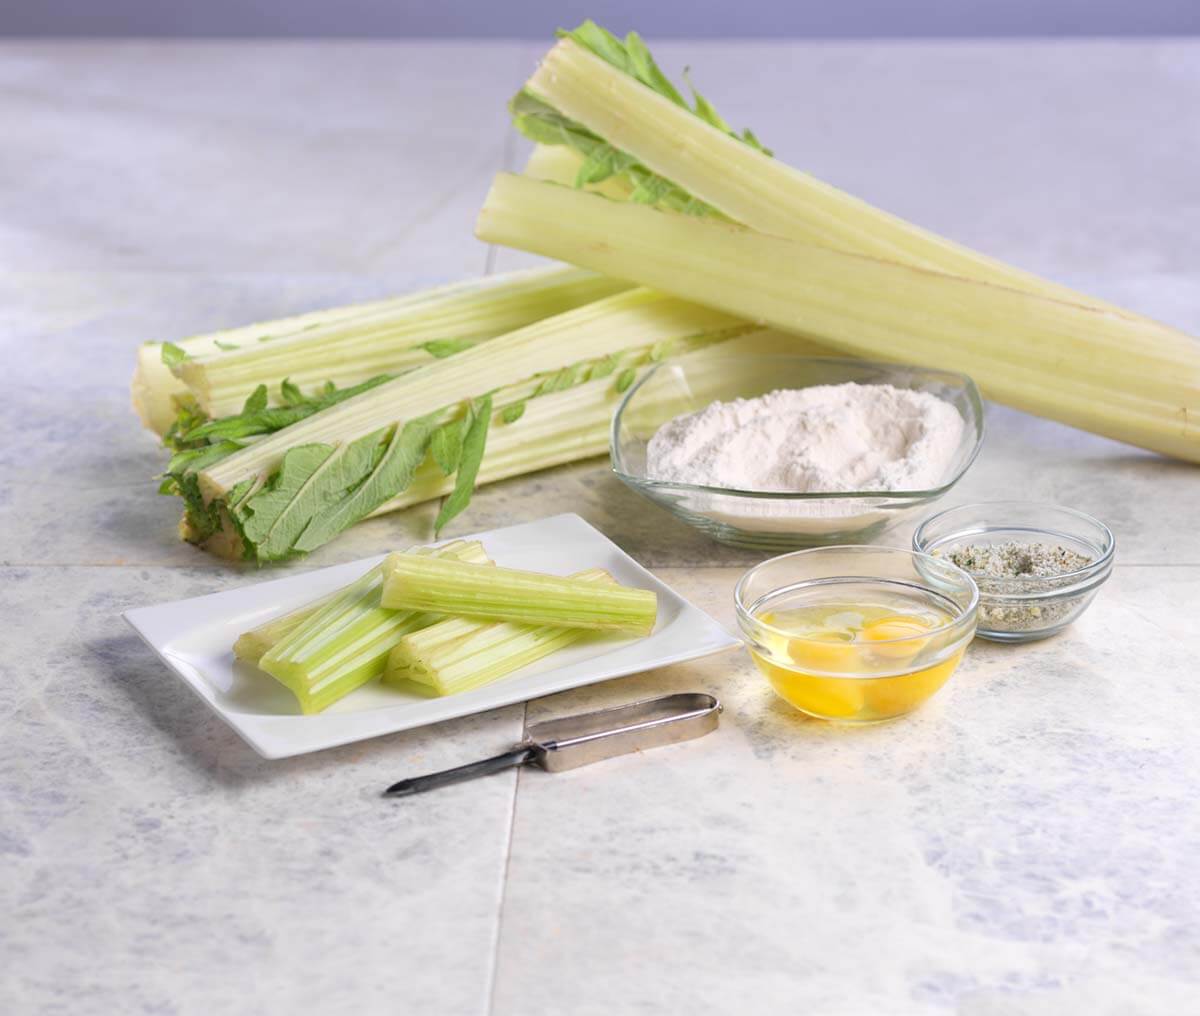 12 Unusual Fruits and Vegetables to Shake Up Your Meals: Cardoon